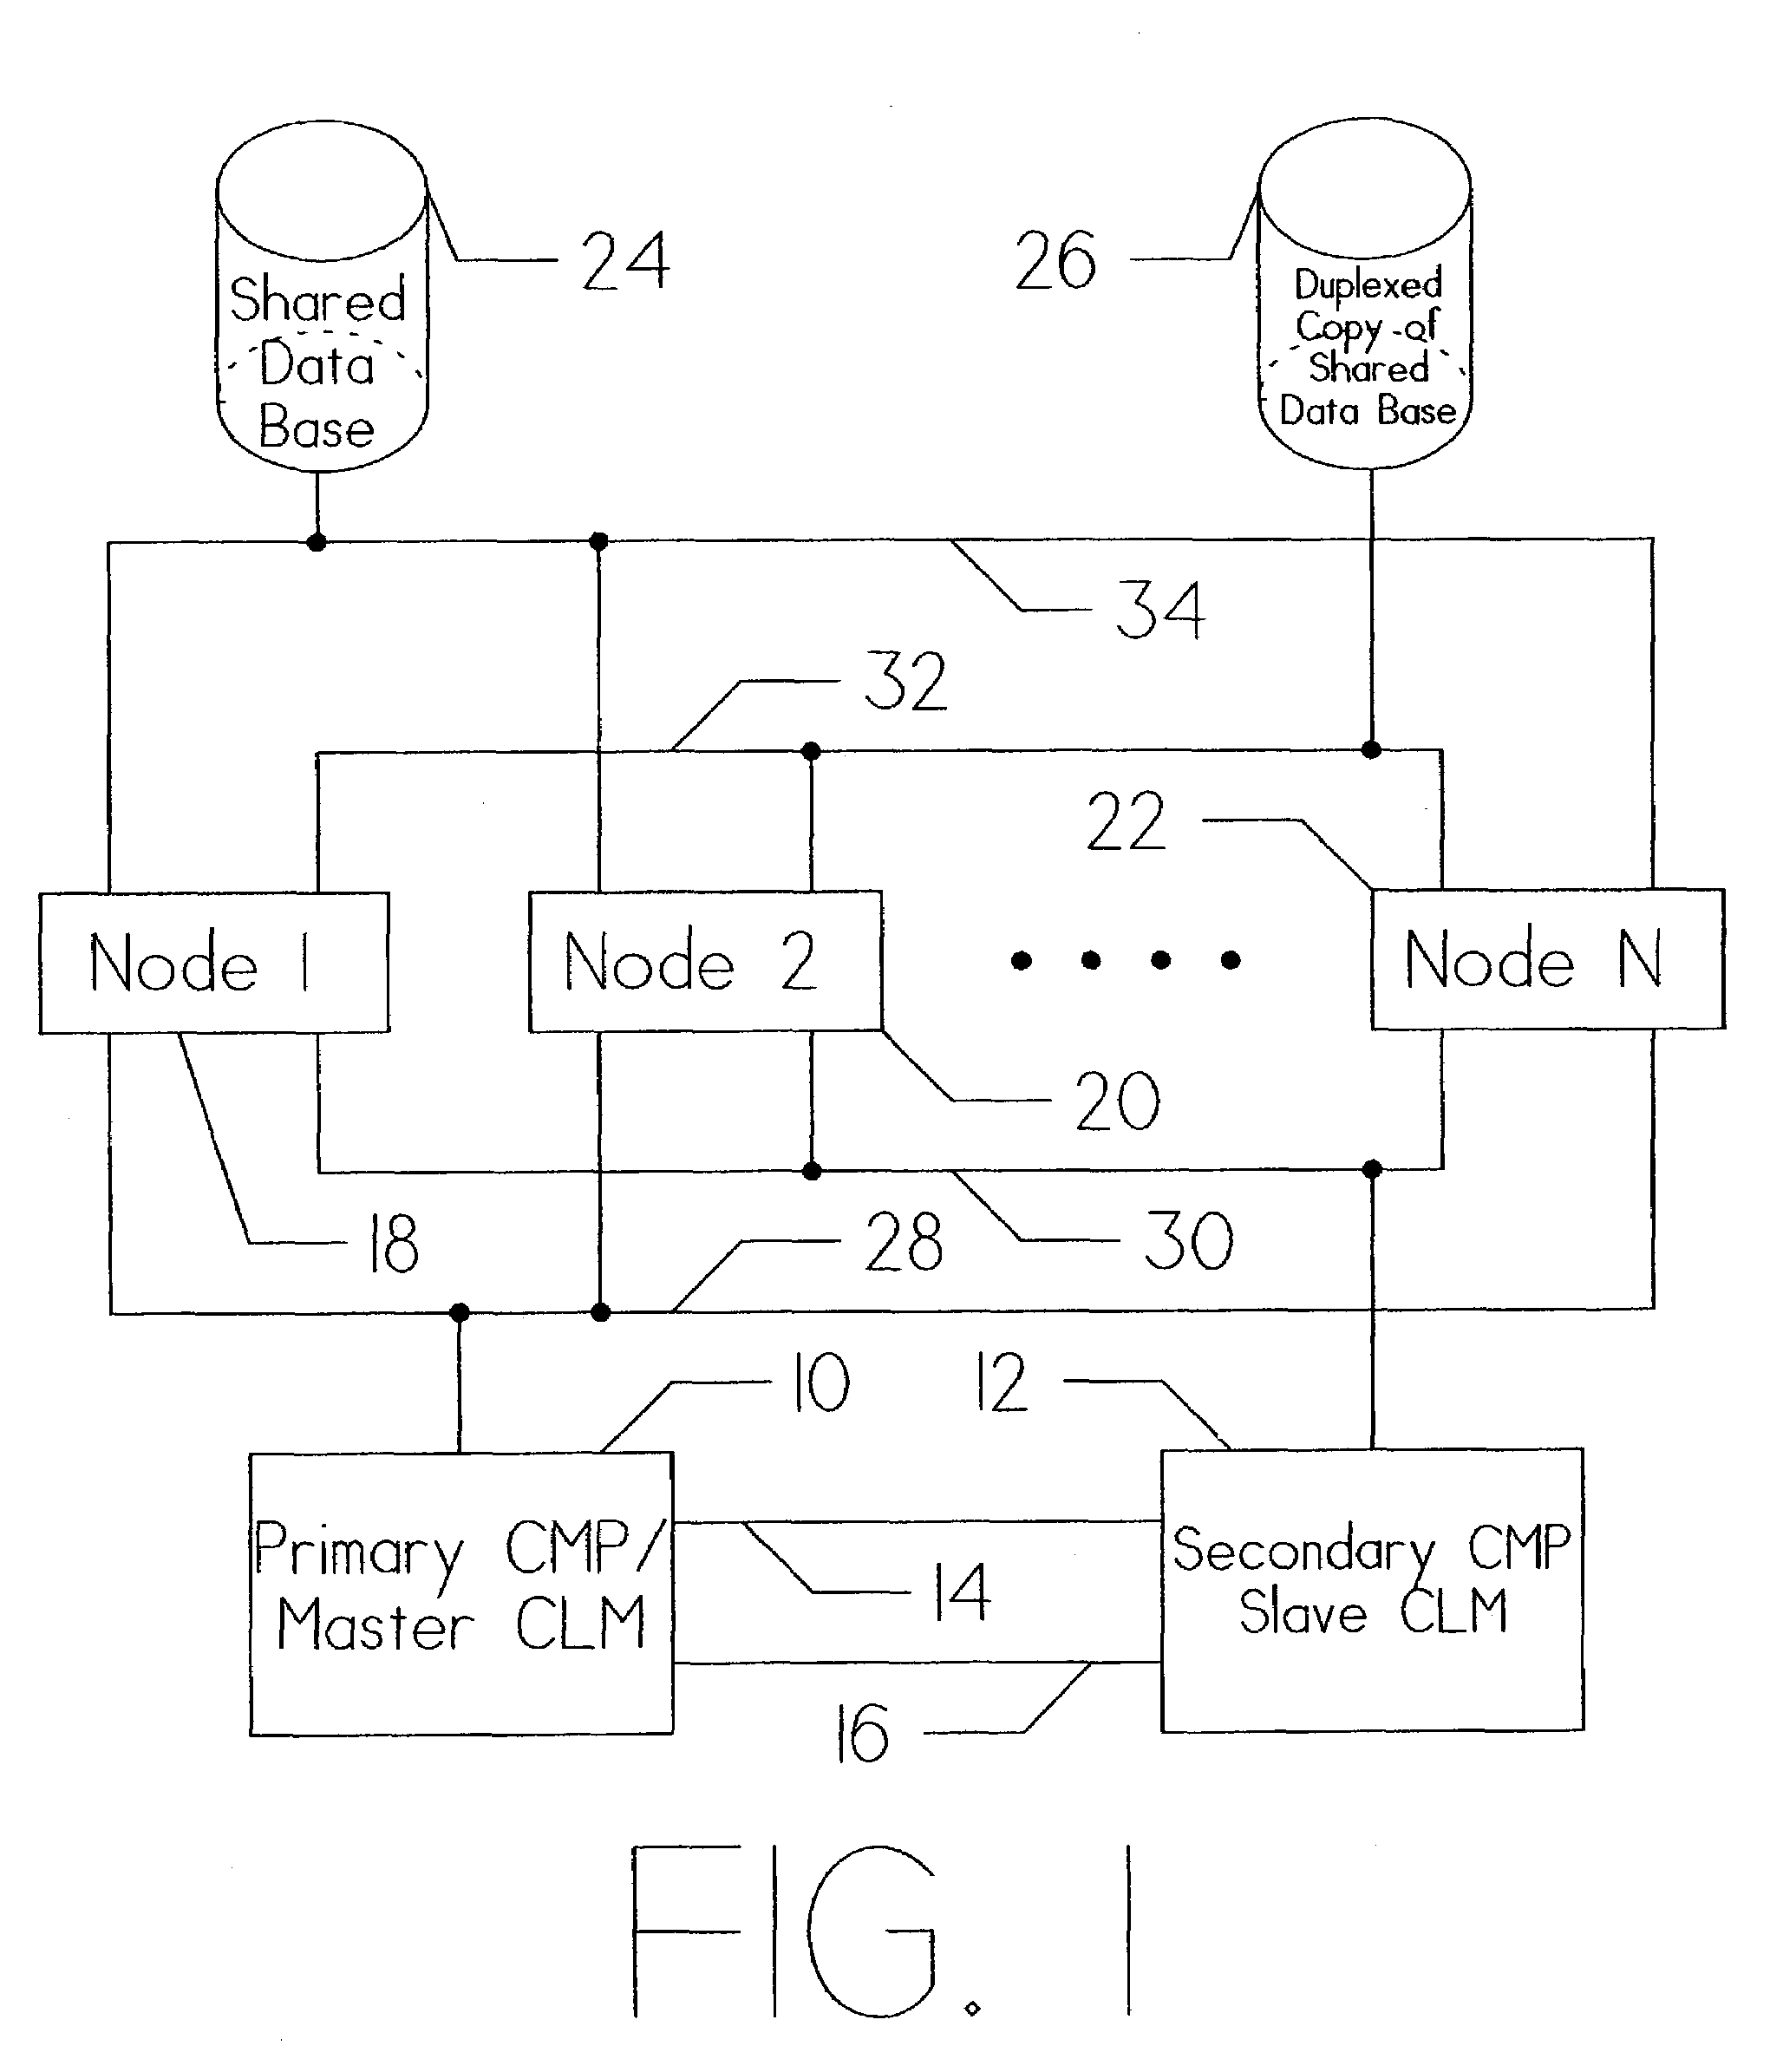 Method for shortening the resynchronization time following failure in a computer system utilizing separate servers for redundancy